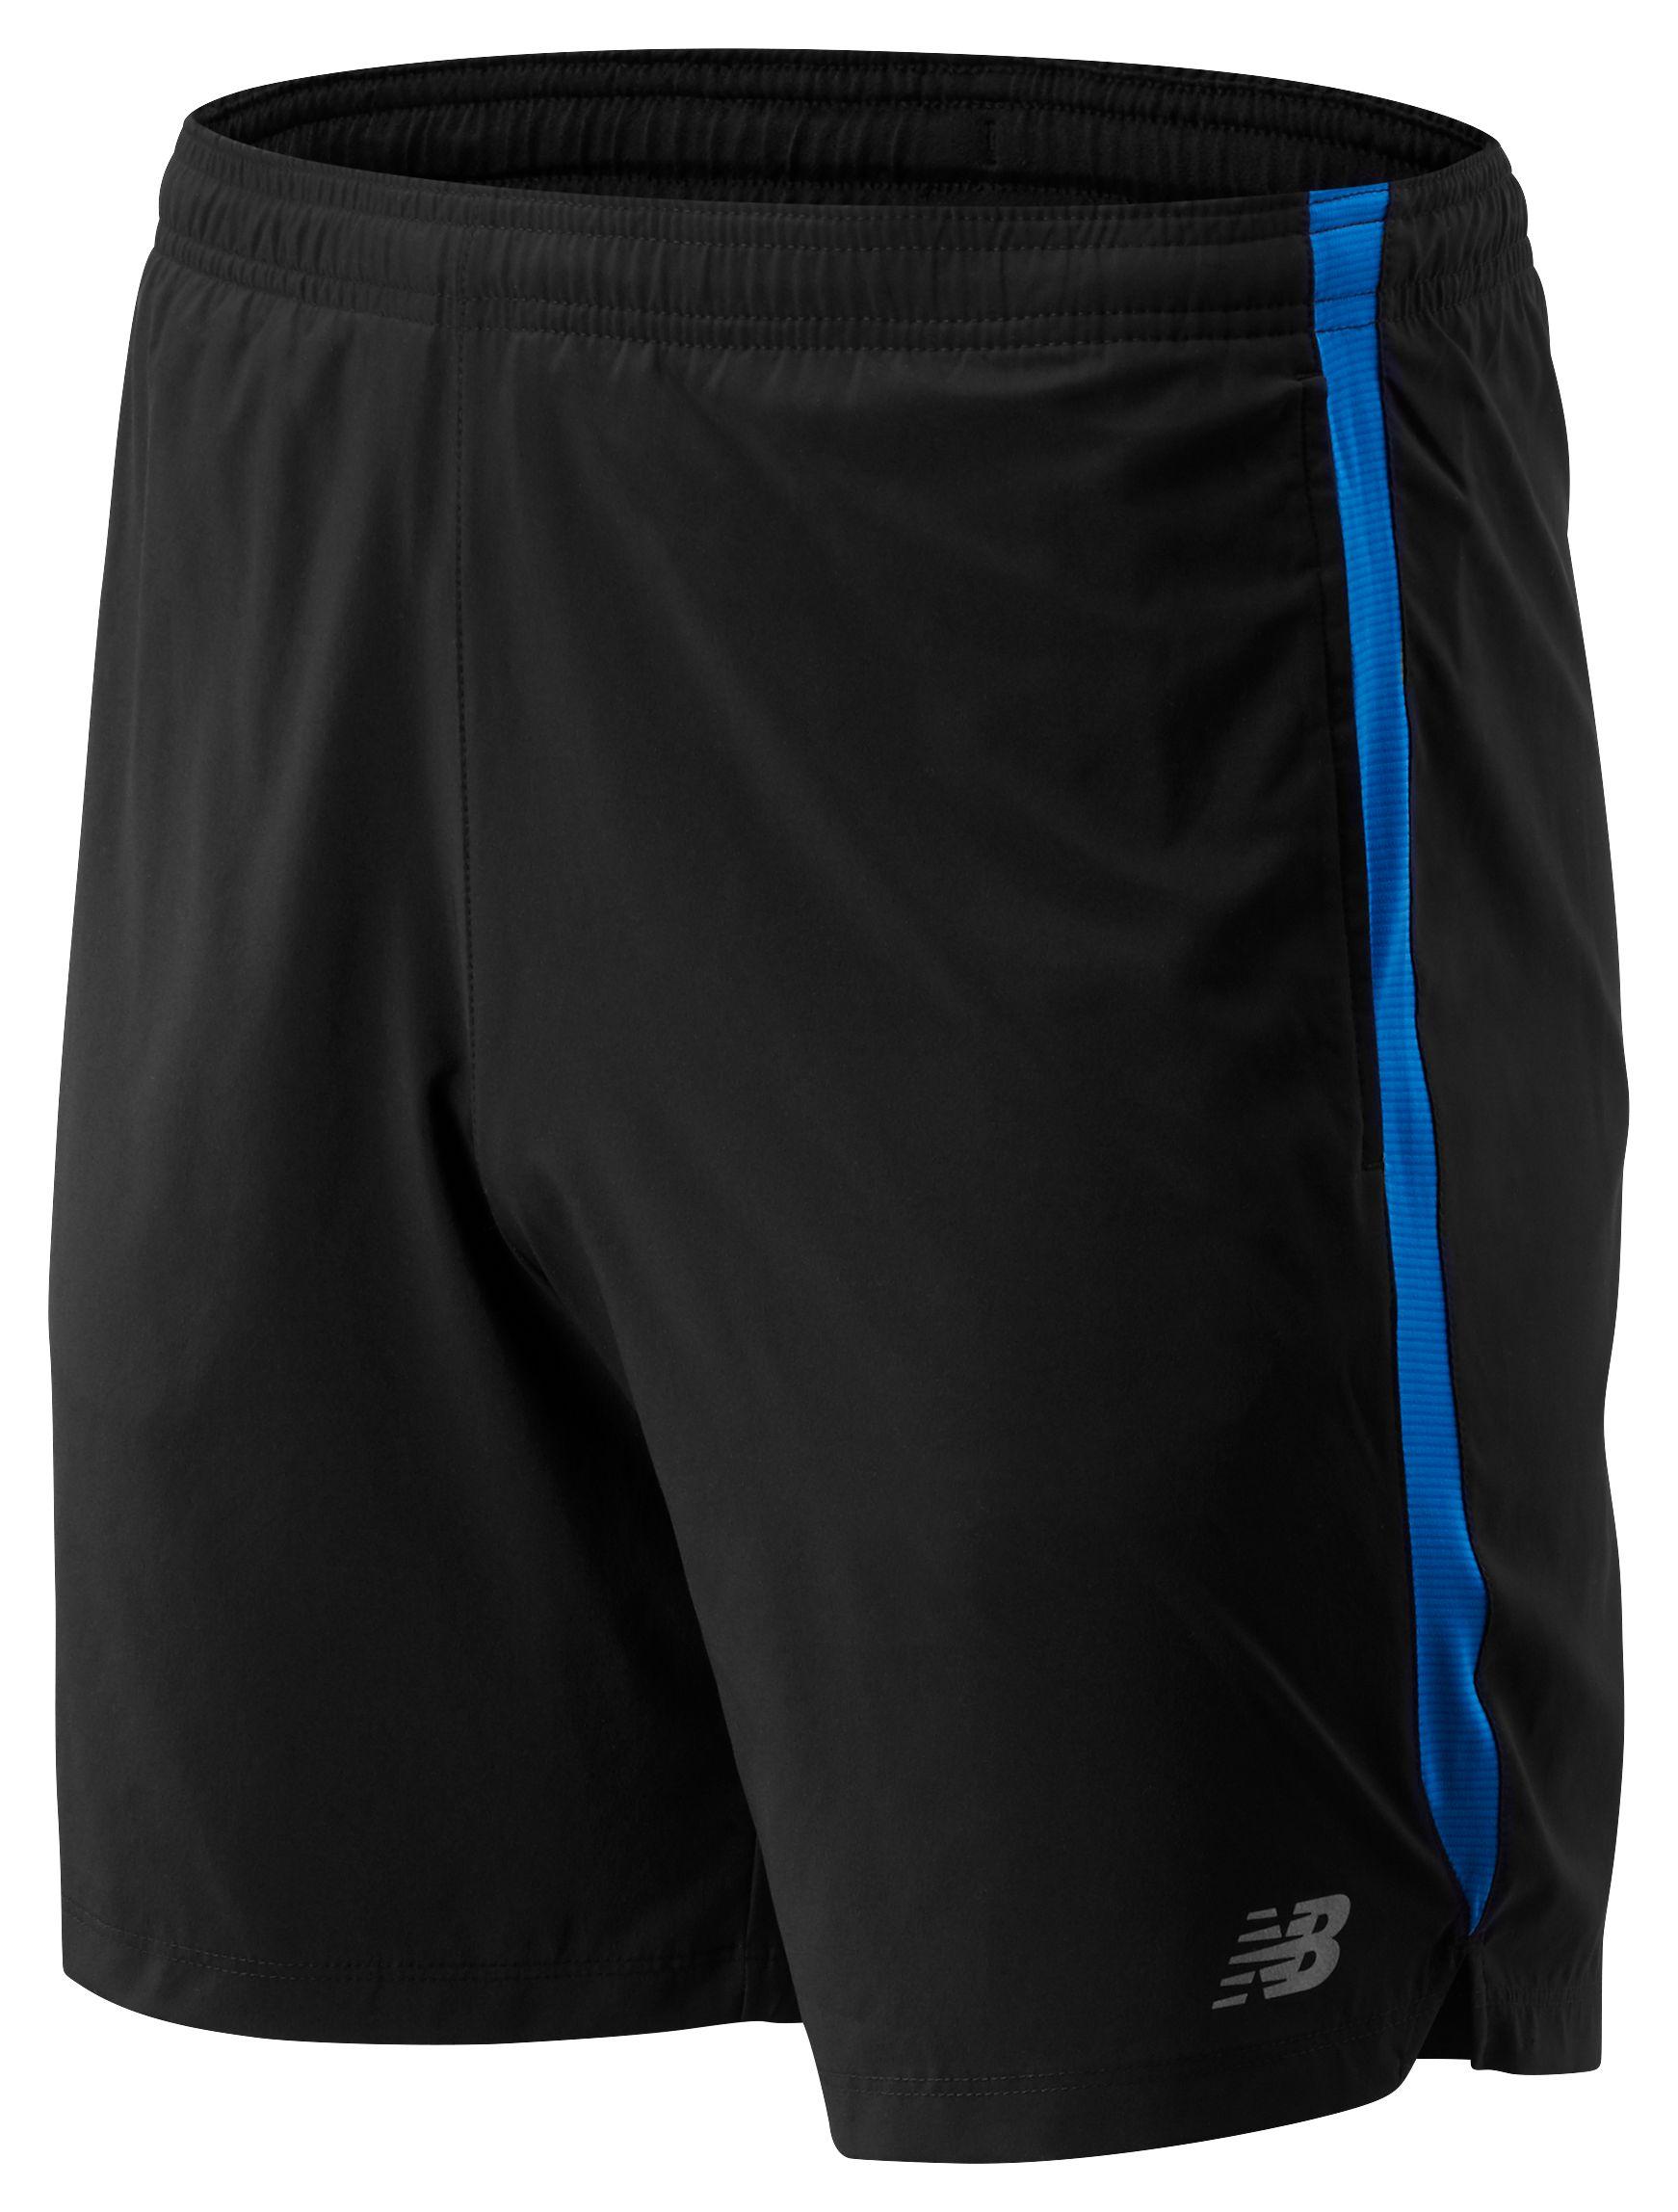 New Balance Accelerate 7 In Short in Black for Men - Lyst